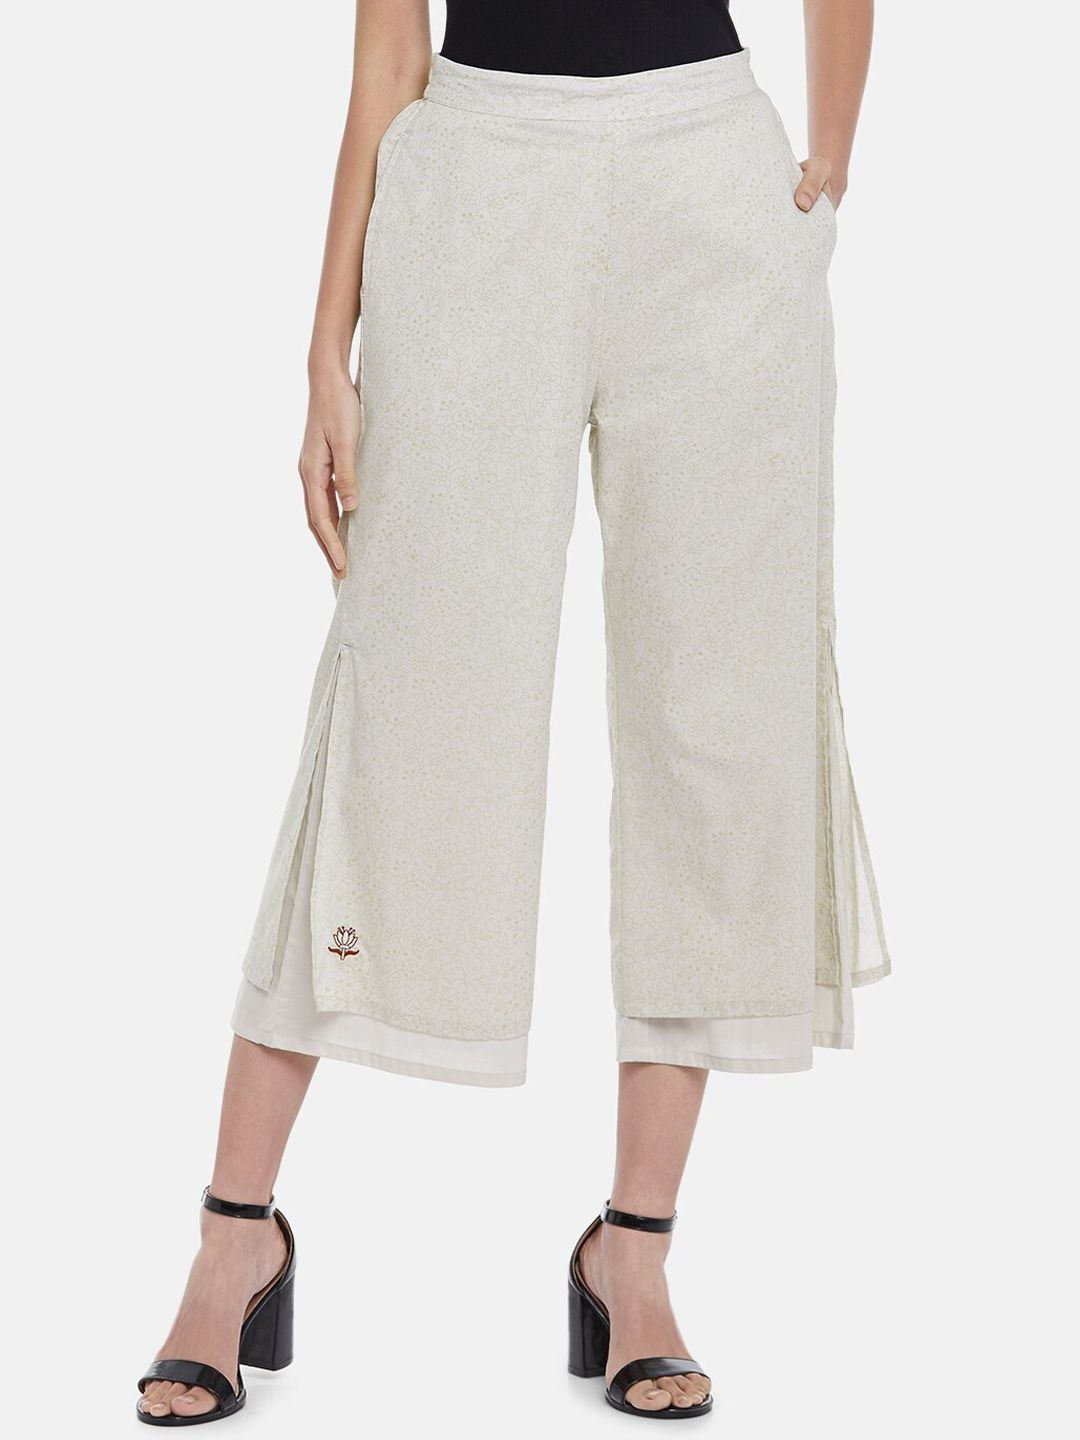 People Women Off-White Printed Layered Flared Cotton Culottes Trousers Price in India